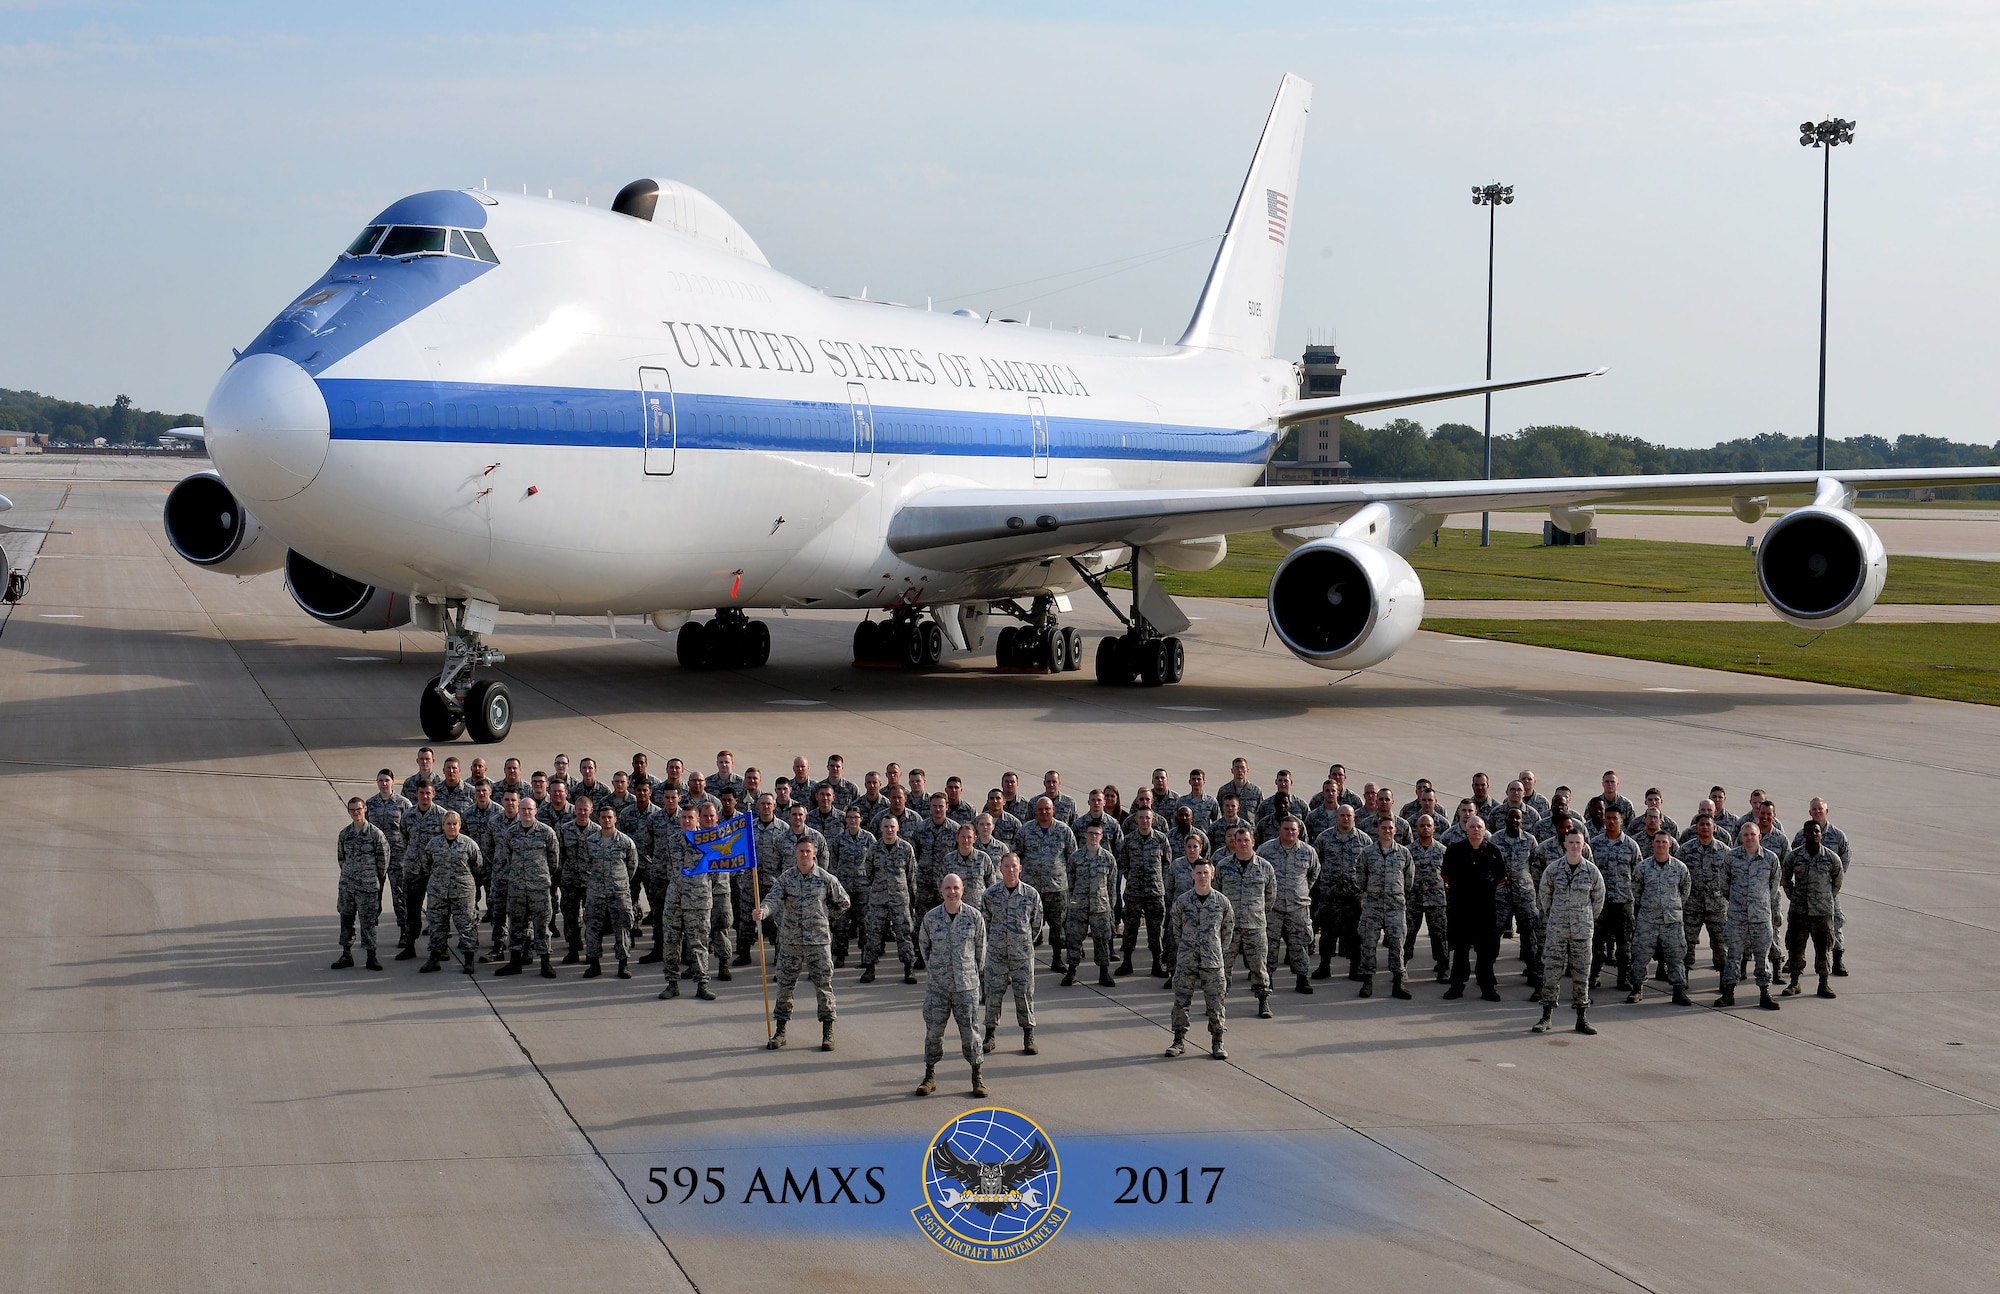 Members of the 595th Aircraft Maintenance Squadron (AMXS) stationed at Offutt Air Force Base, Nebraska, stand on the flightline in front of the E-4B Sept. 15, 2017. The 595th AMXS was awarded the Air Force Global Strike Command Unit Effectiveness Award Jan. 4, 2018, barely a year after the activation of the group.